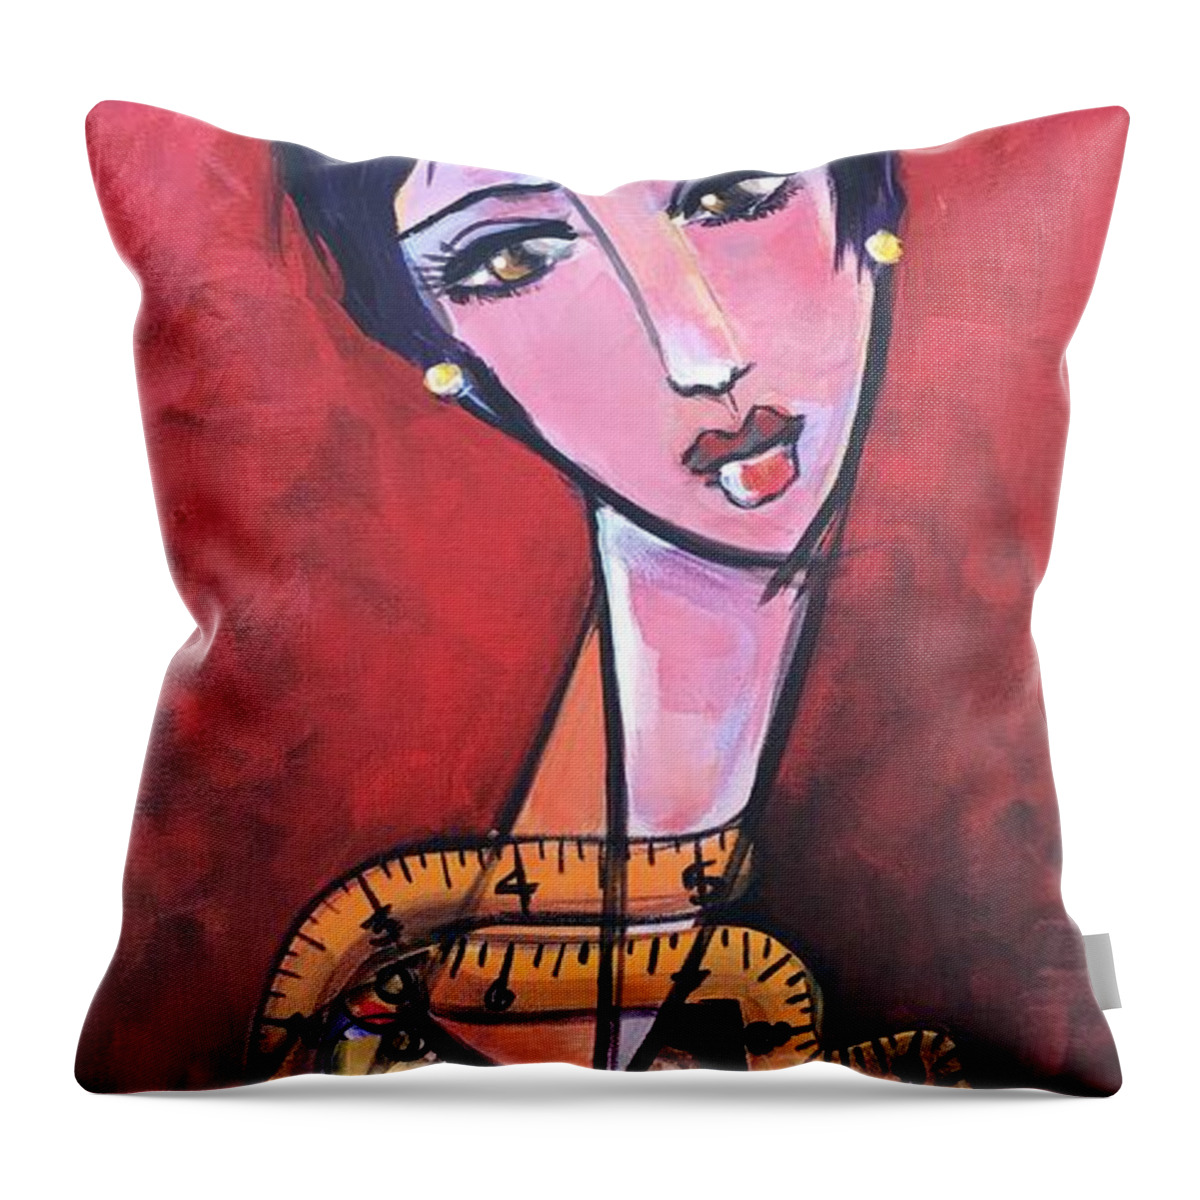 Seamstress Throw Pillow featuring the painting Ms. Bimba Fashionable Seamstress by Laurie Maves ART